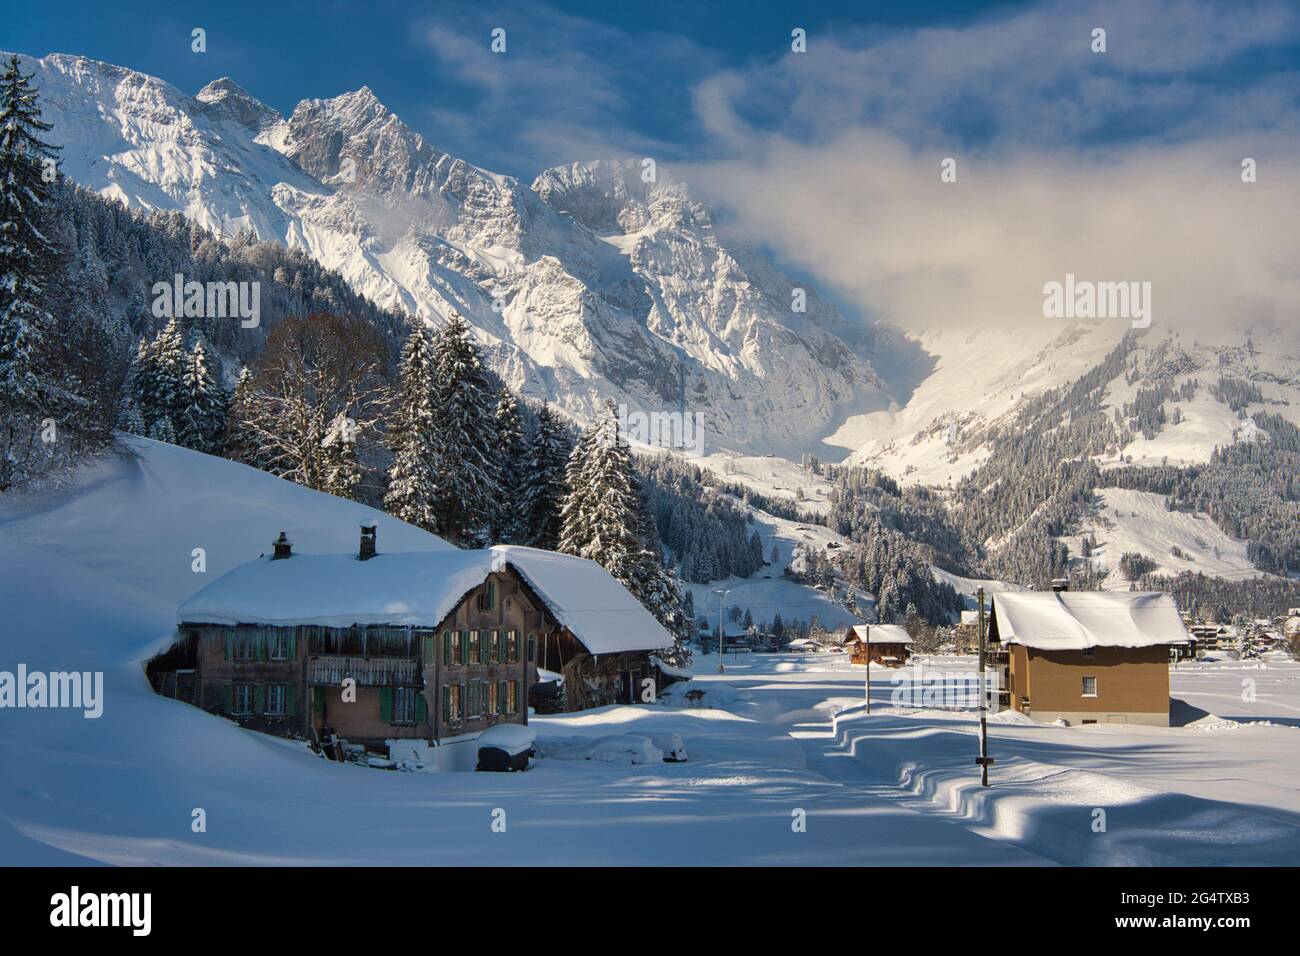 Winter landscape of a house and hut in winter snows with a lovely mountain backdrop with blue sky, at Engelberg in Obwalden canton, Switzerland Stock Photo